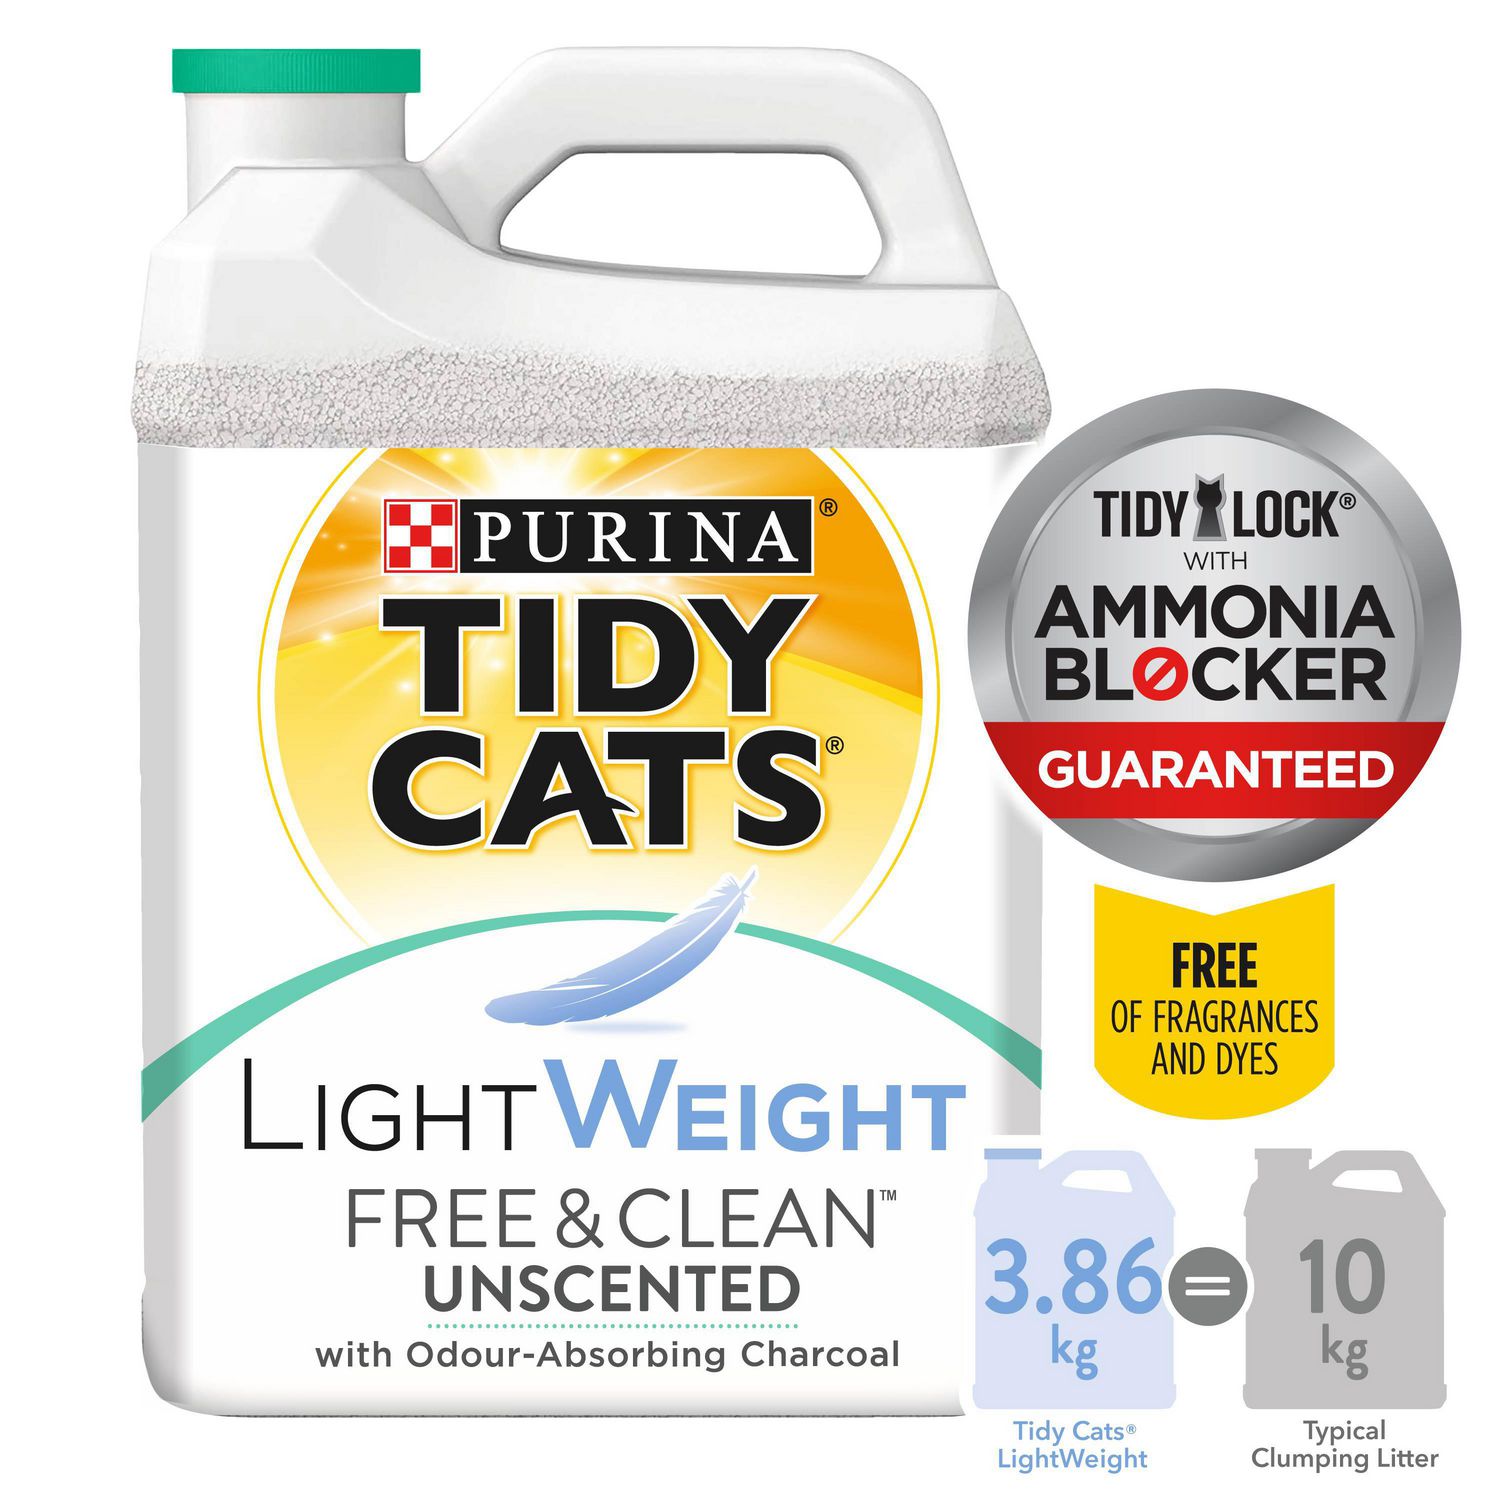 Tidy Cats Free & Clean Lightweight Cat Litter for Multiple Cats